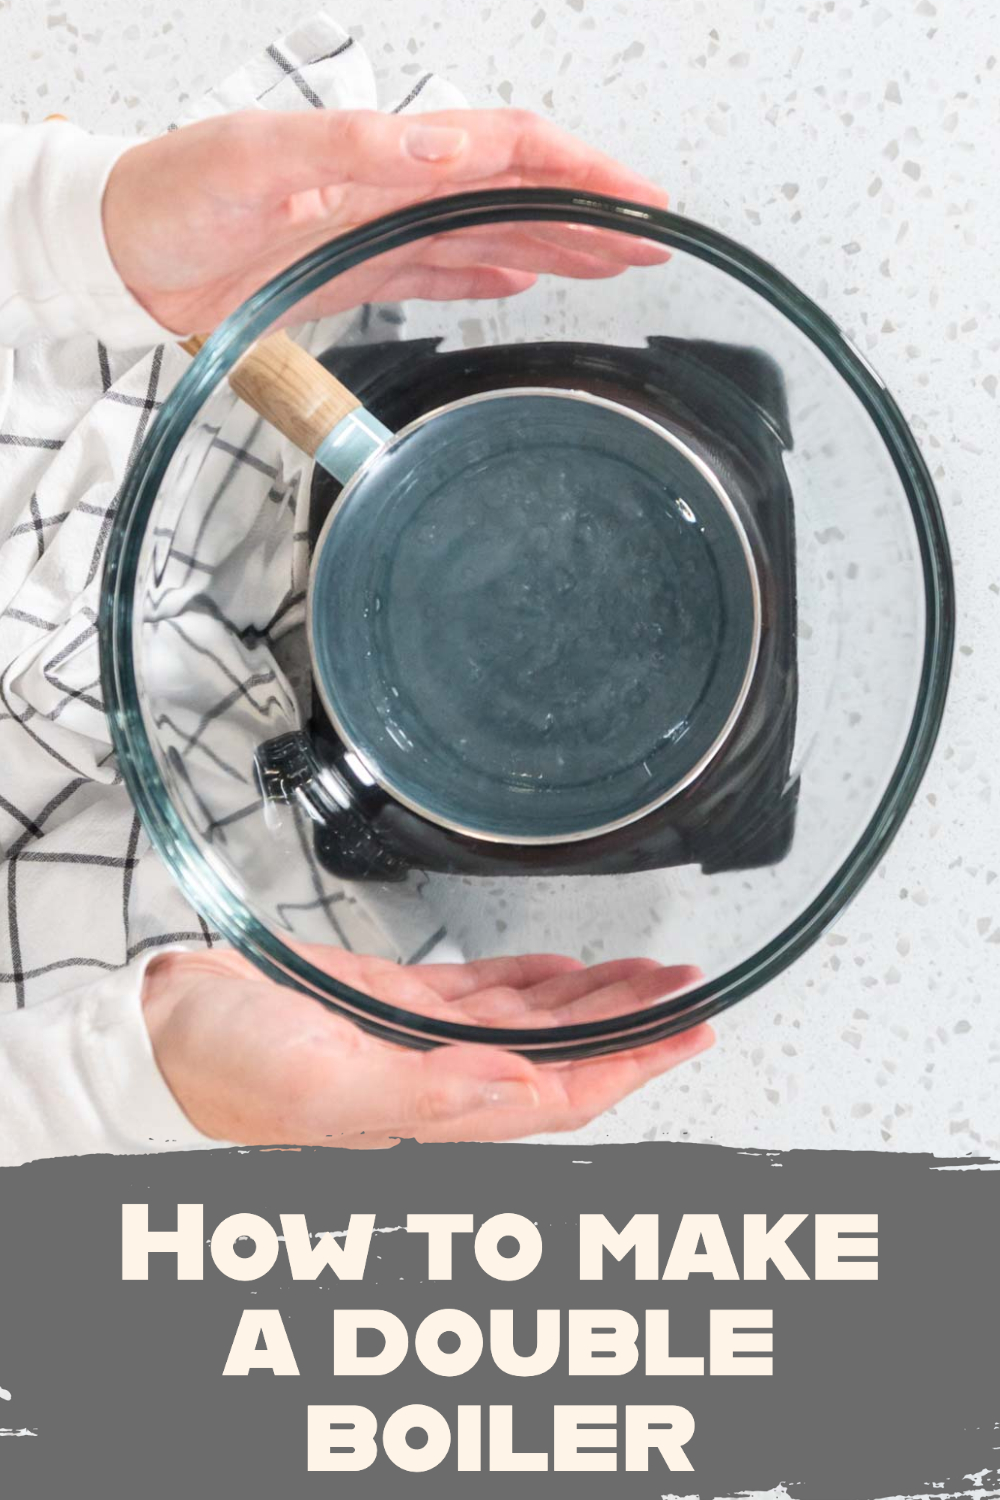 How to make a double boiler